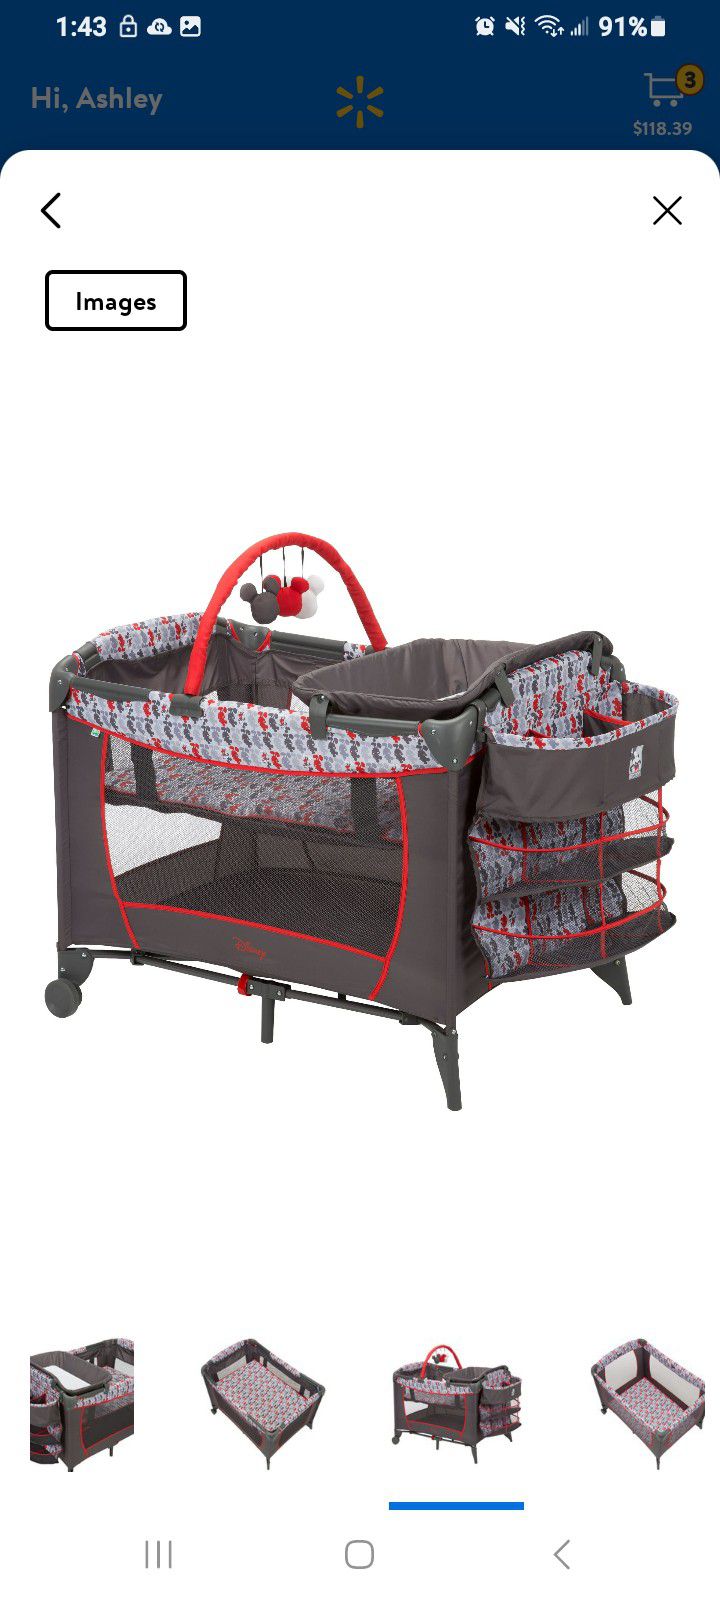 Unisex Disney Playpen Mickey Mouse Red White And Gray